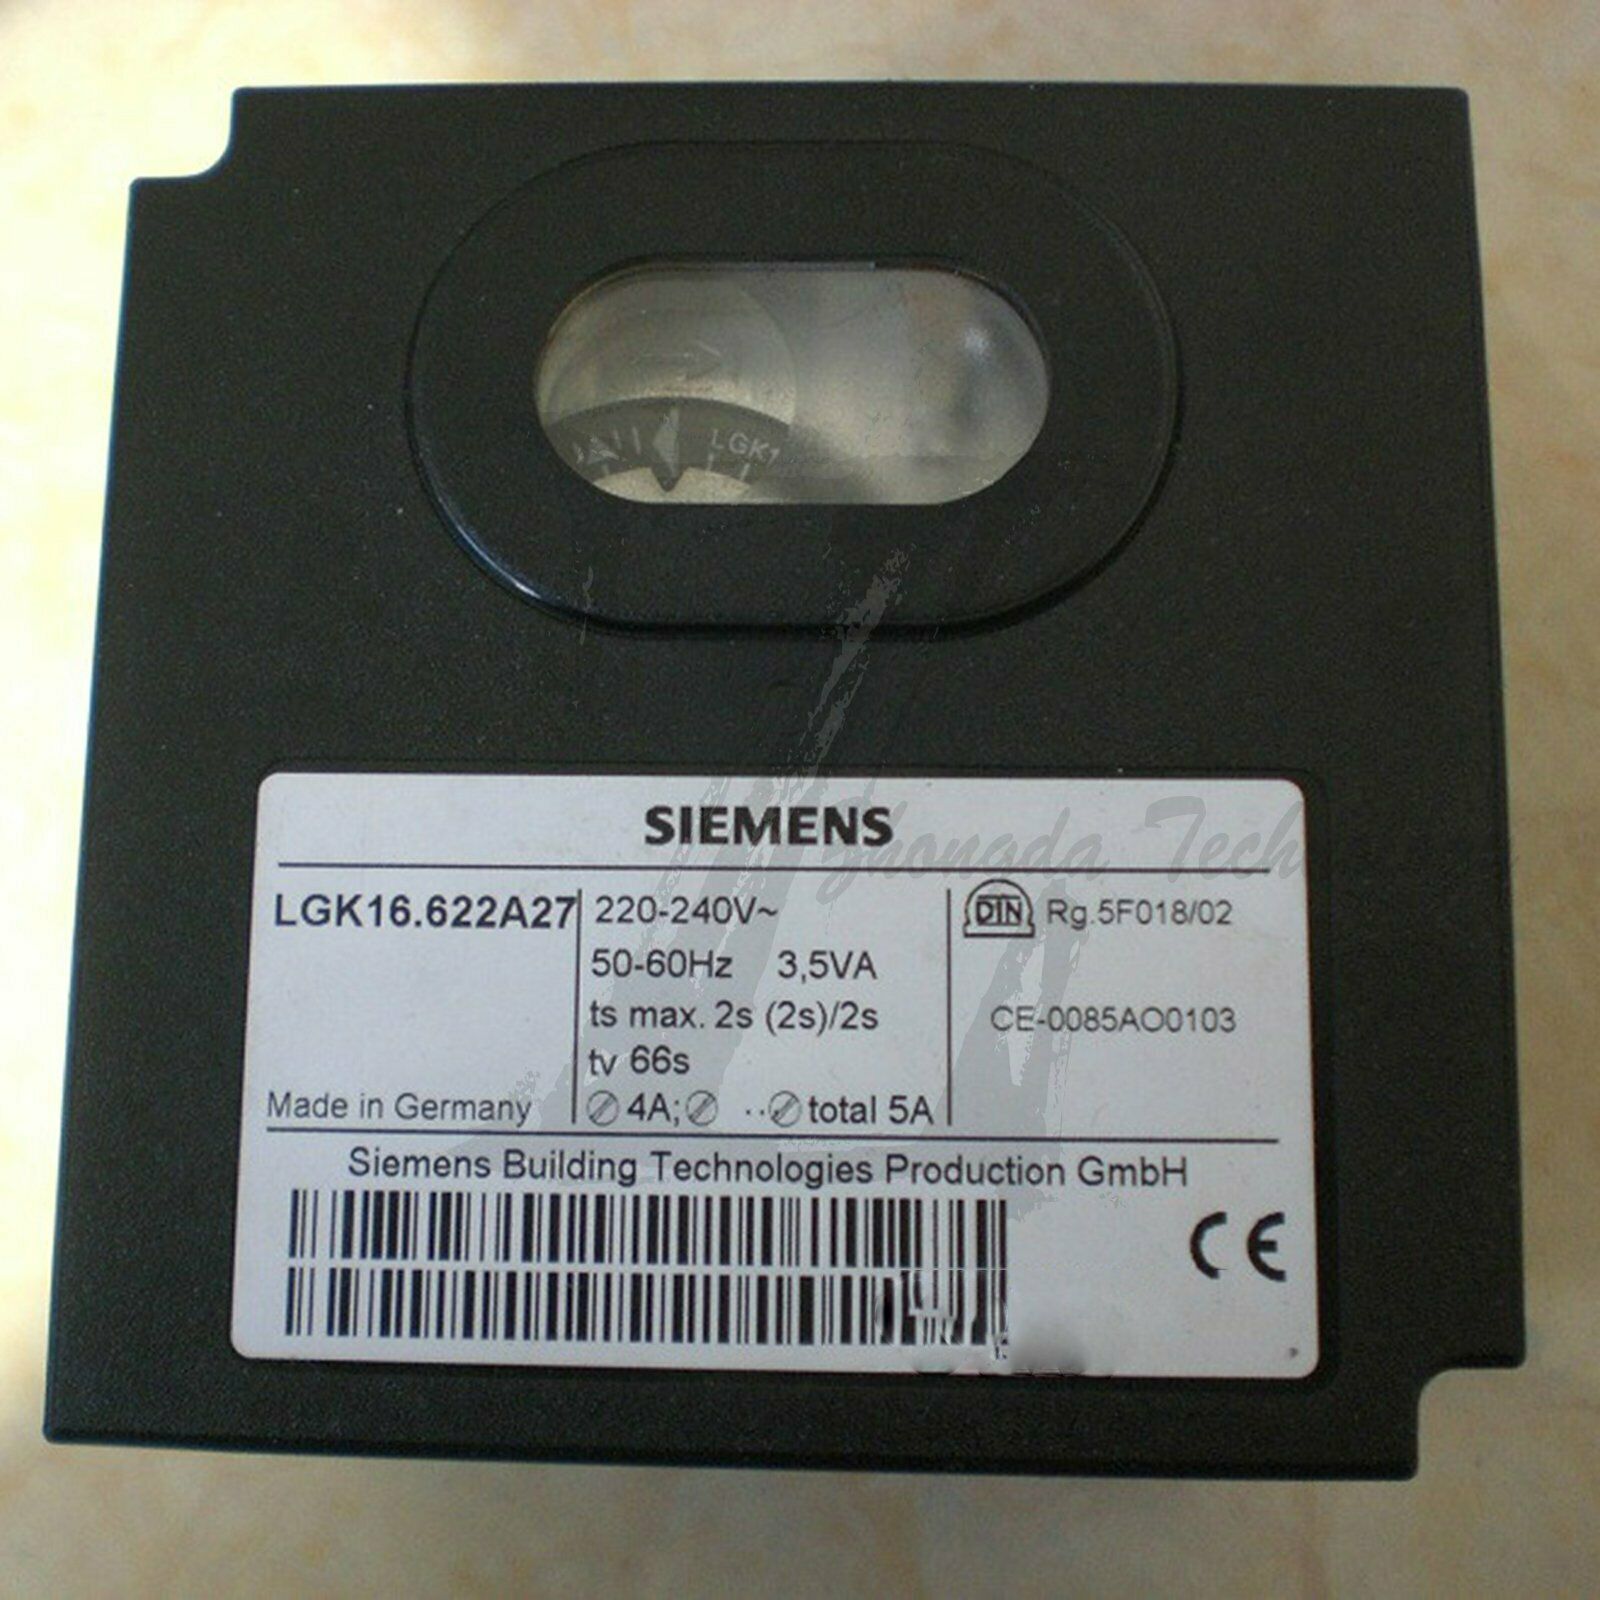 New Siemens combustion controller LGK16.622A27